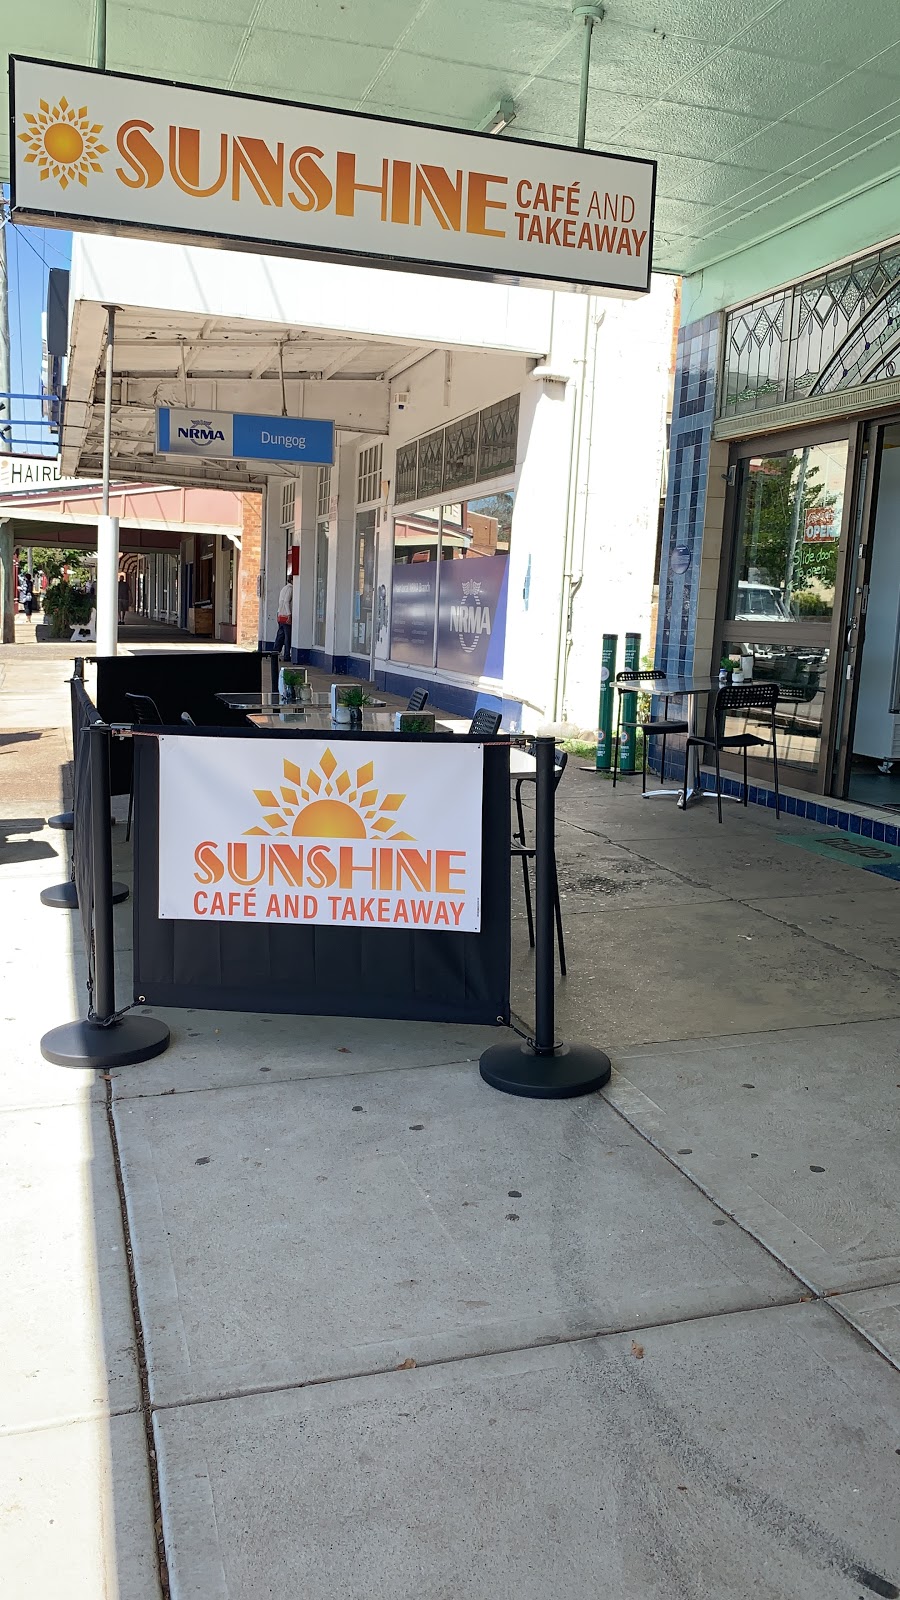 Sunshine cafe and takeaway dungog | cafe | 172 Dowling St, Dungog NSW 2324, Australia | 0431592089 OR +61 431 592 089